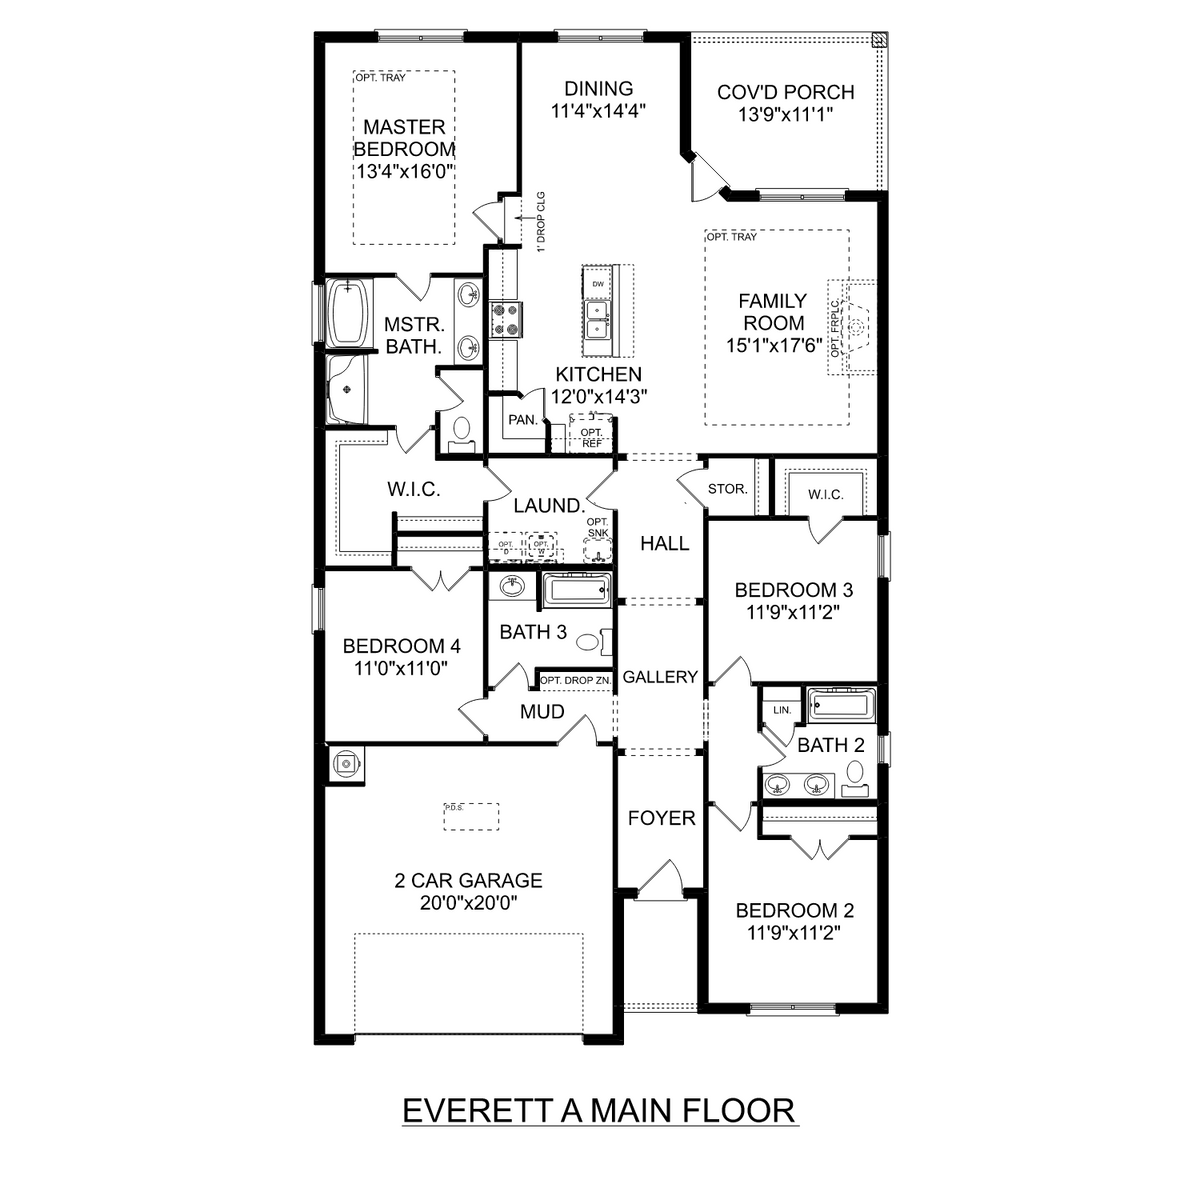 1 - The Everett buildable floor plan layout in Davidson Homes' Creekside community.